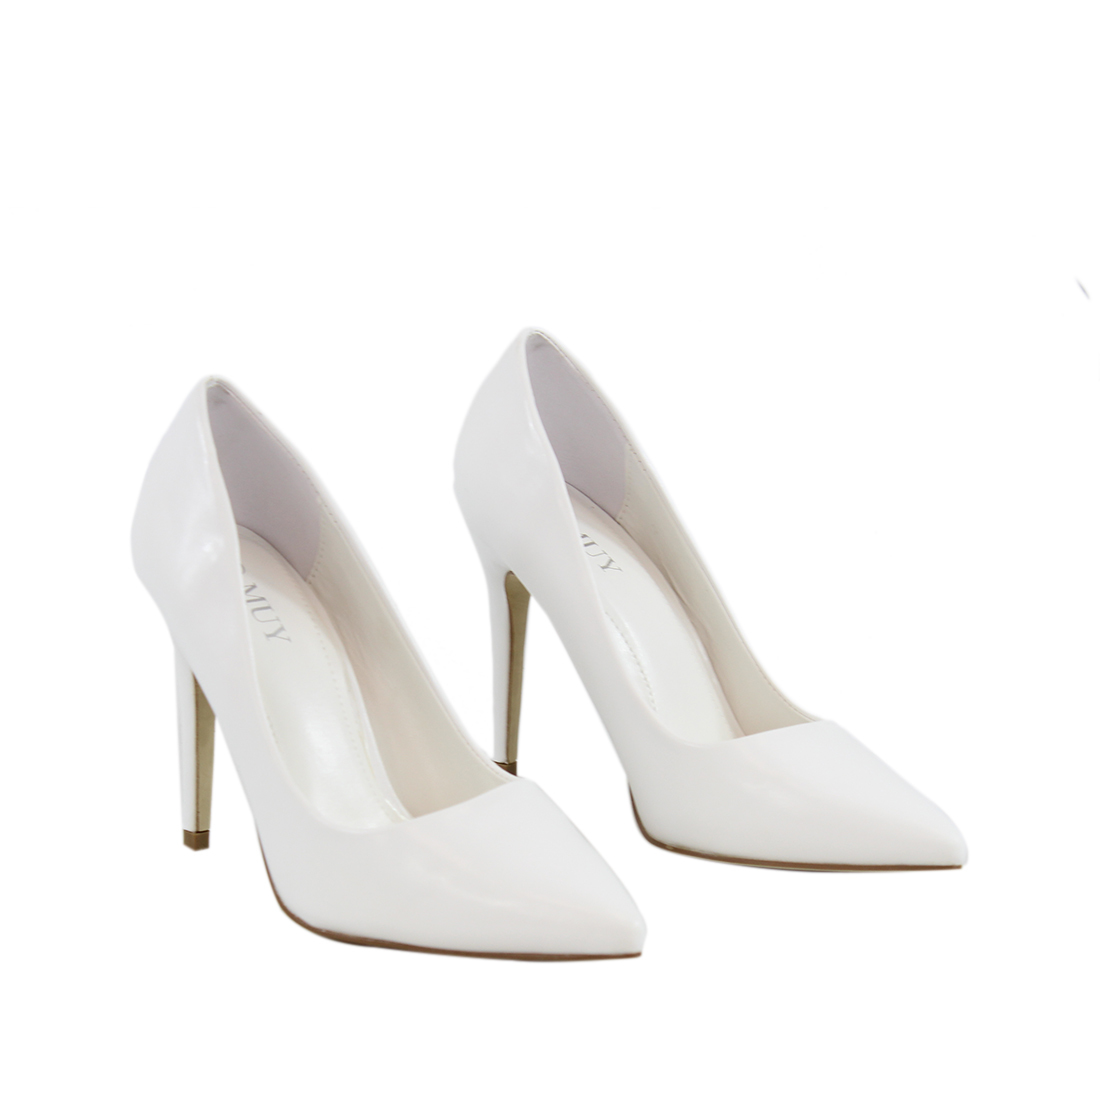 * Alaka Pointed Style with thin heels